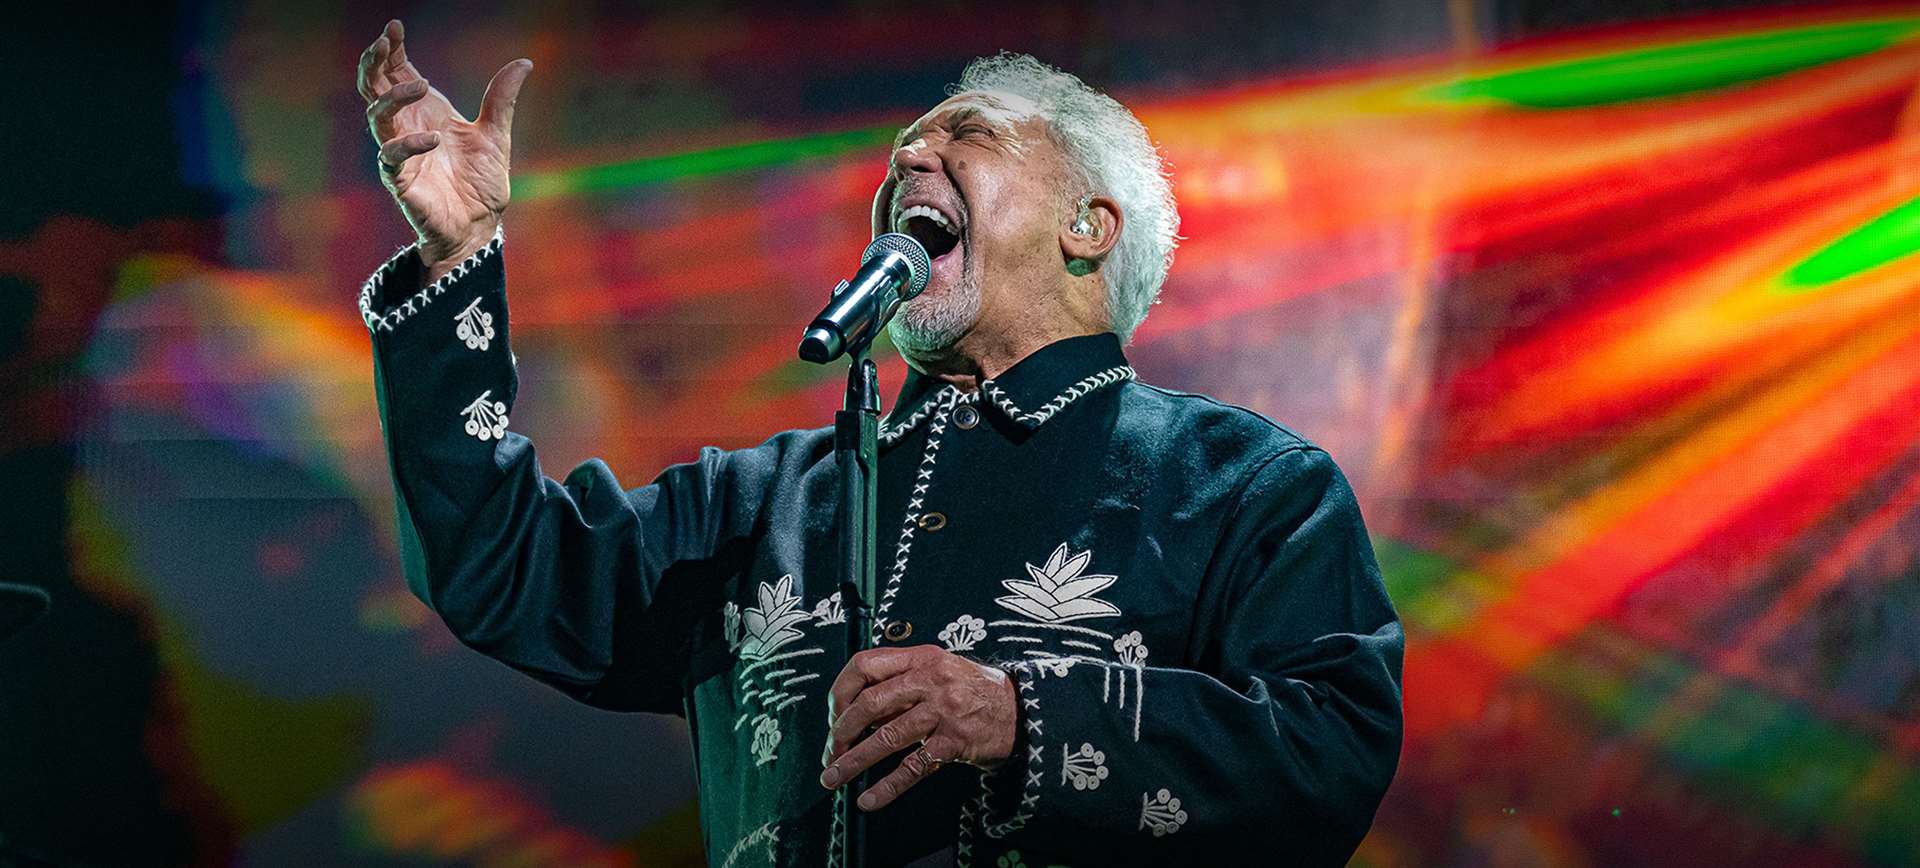 Welsh singer Tom Jones will be performing at Dreamland in July. Picture: Margate Summer Series